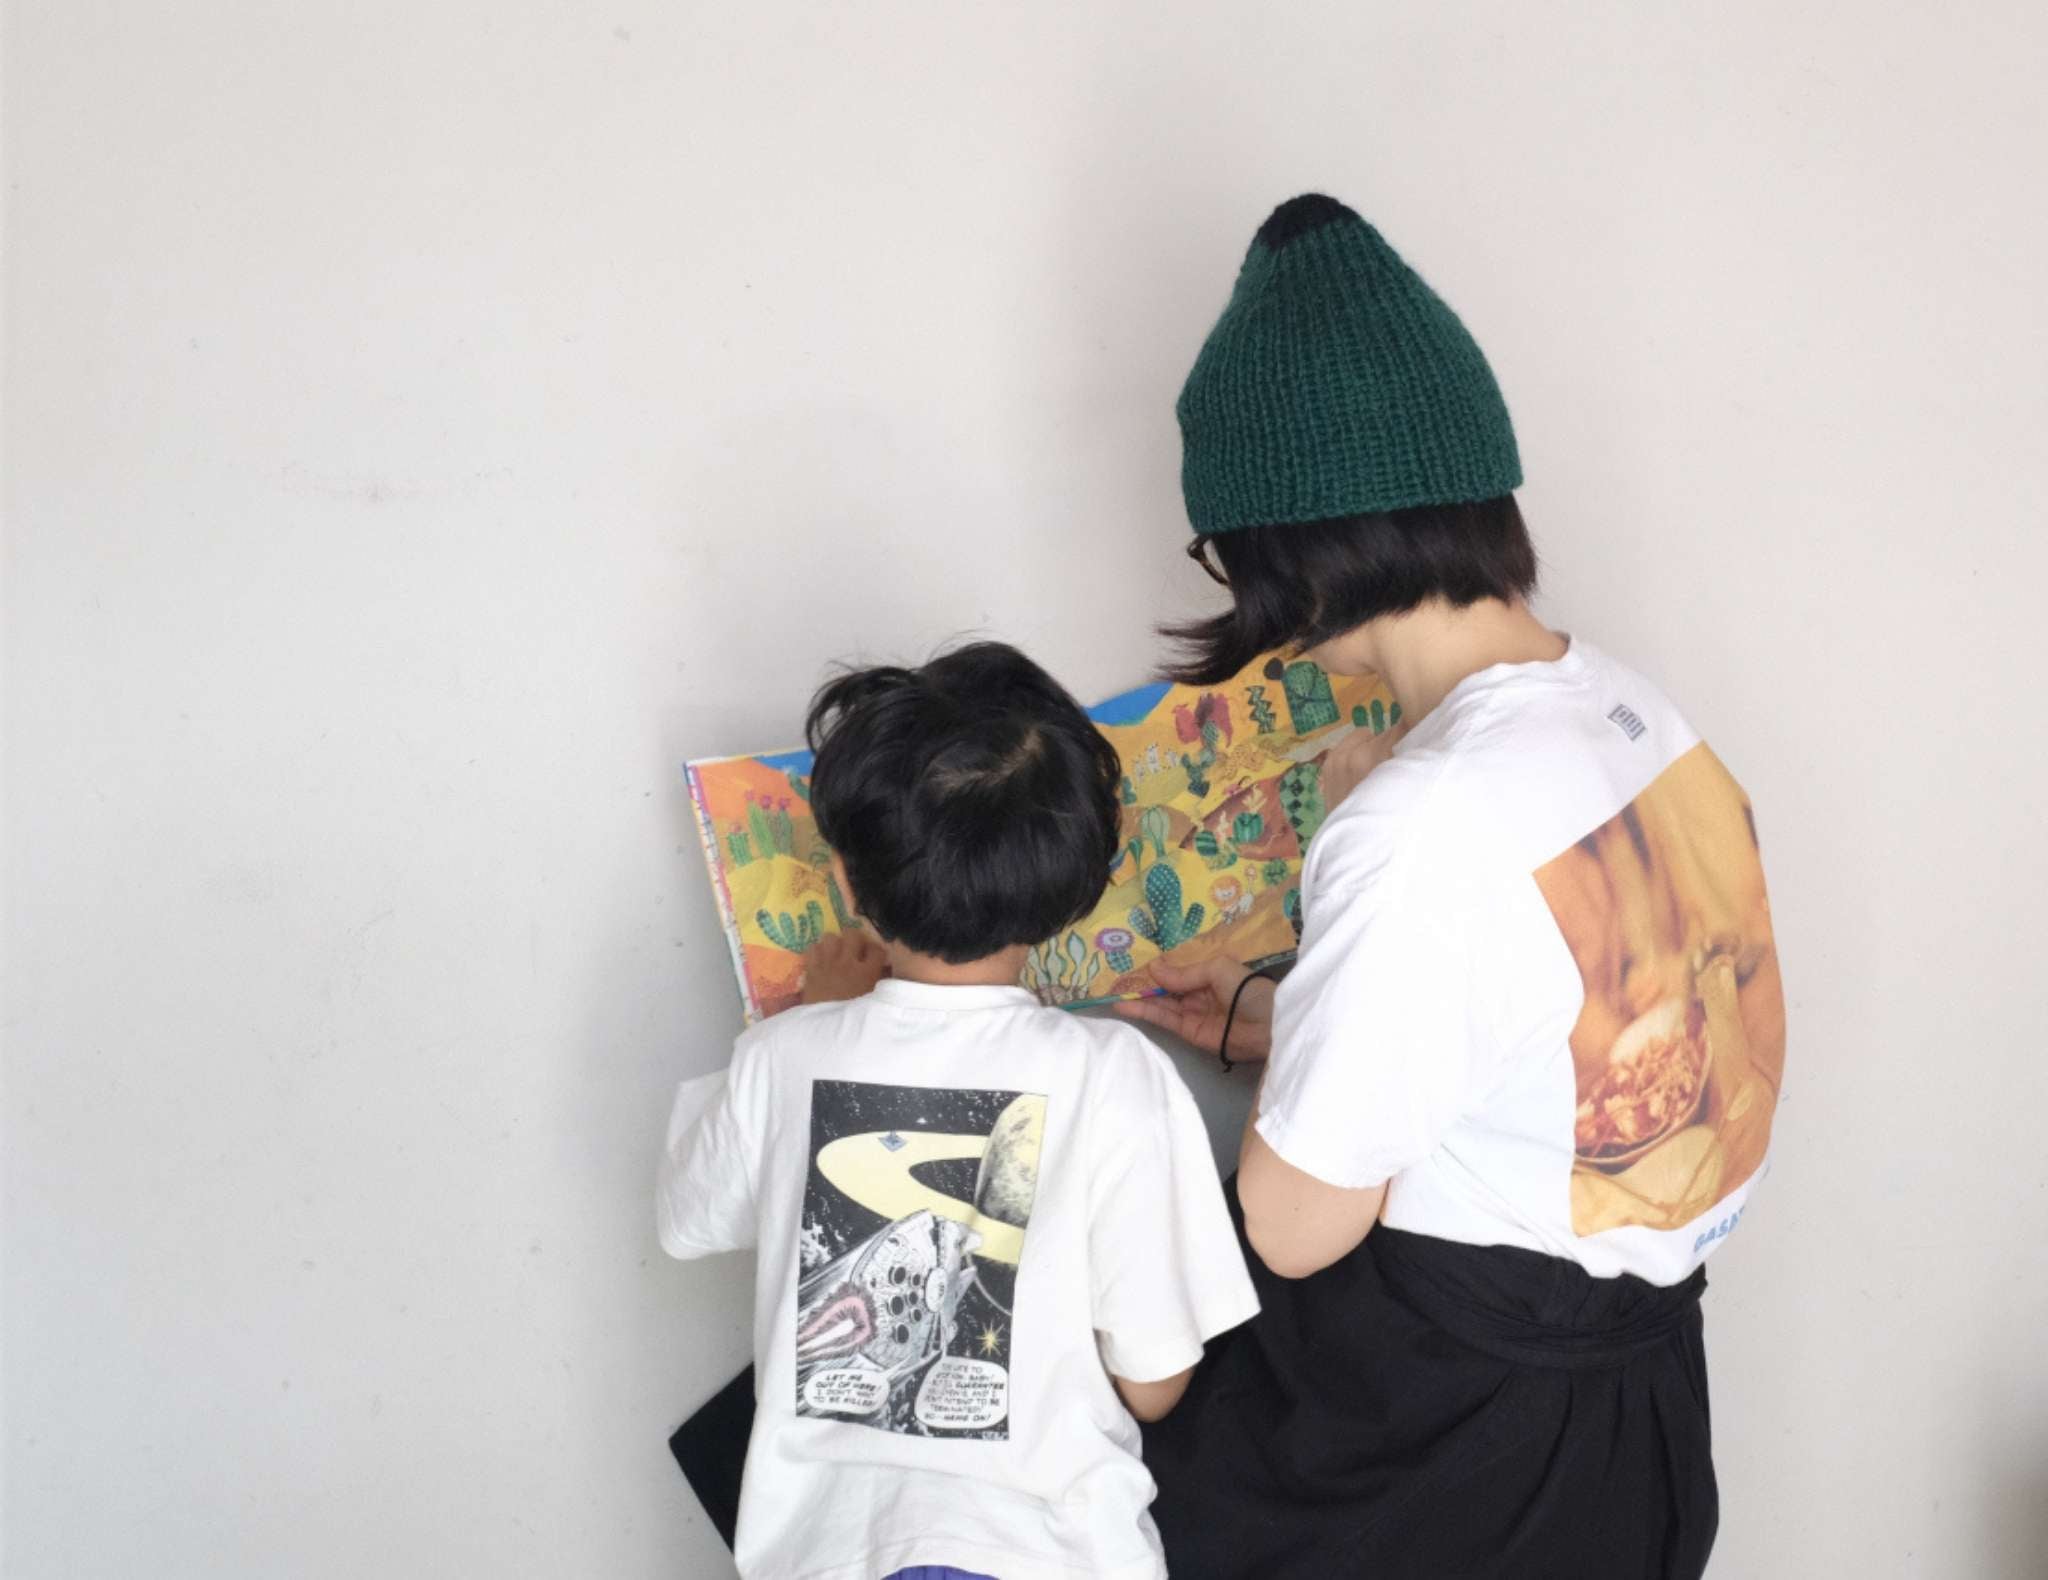 A small child and parent, both with straight black hair, are pictured from behind reading a picture book. They both wear white graphic t shirts and the adult has a teal ribbed hat.